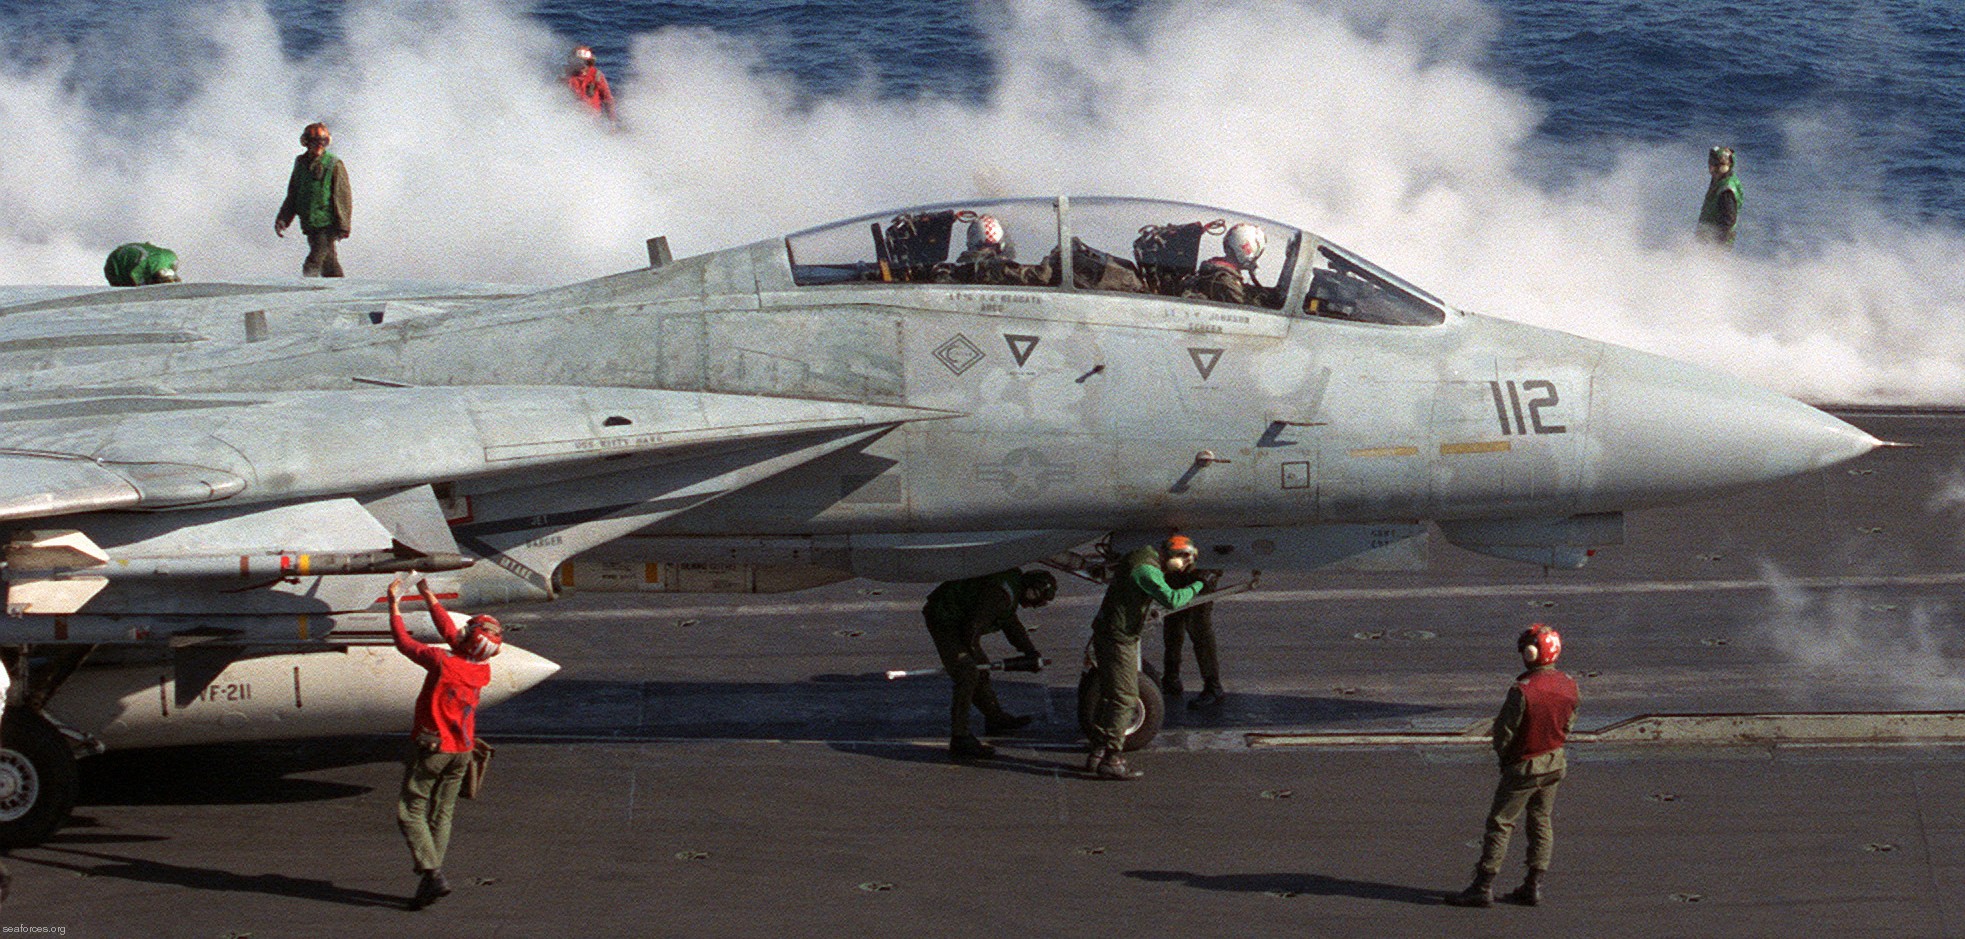 vf-211 fighting checkmates fighter squadron f-14a tomcat us navy carrier air wing cvw-9 uss kitty hawk cv-63 64